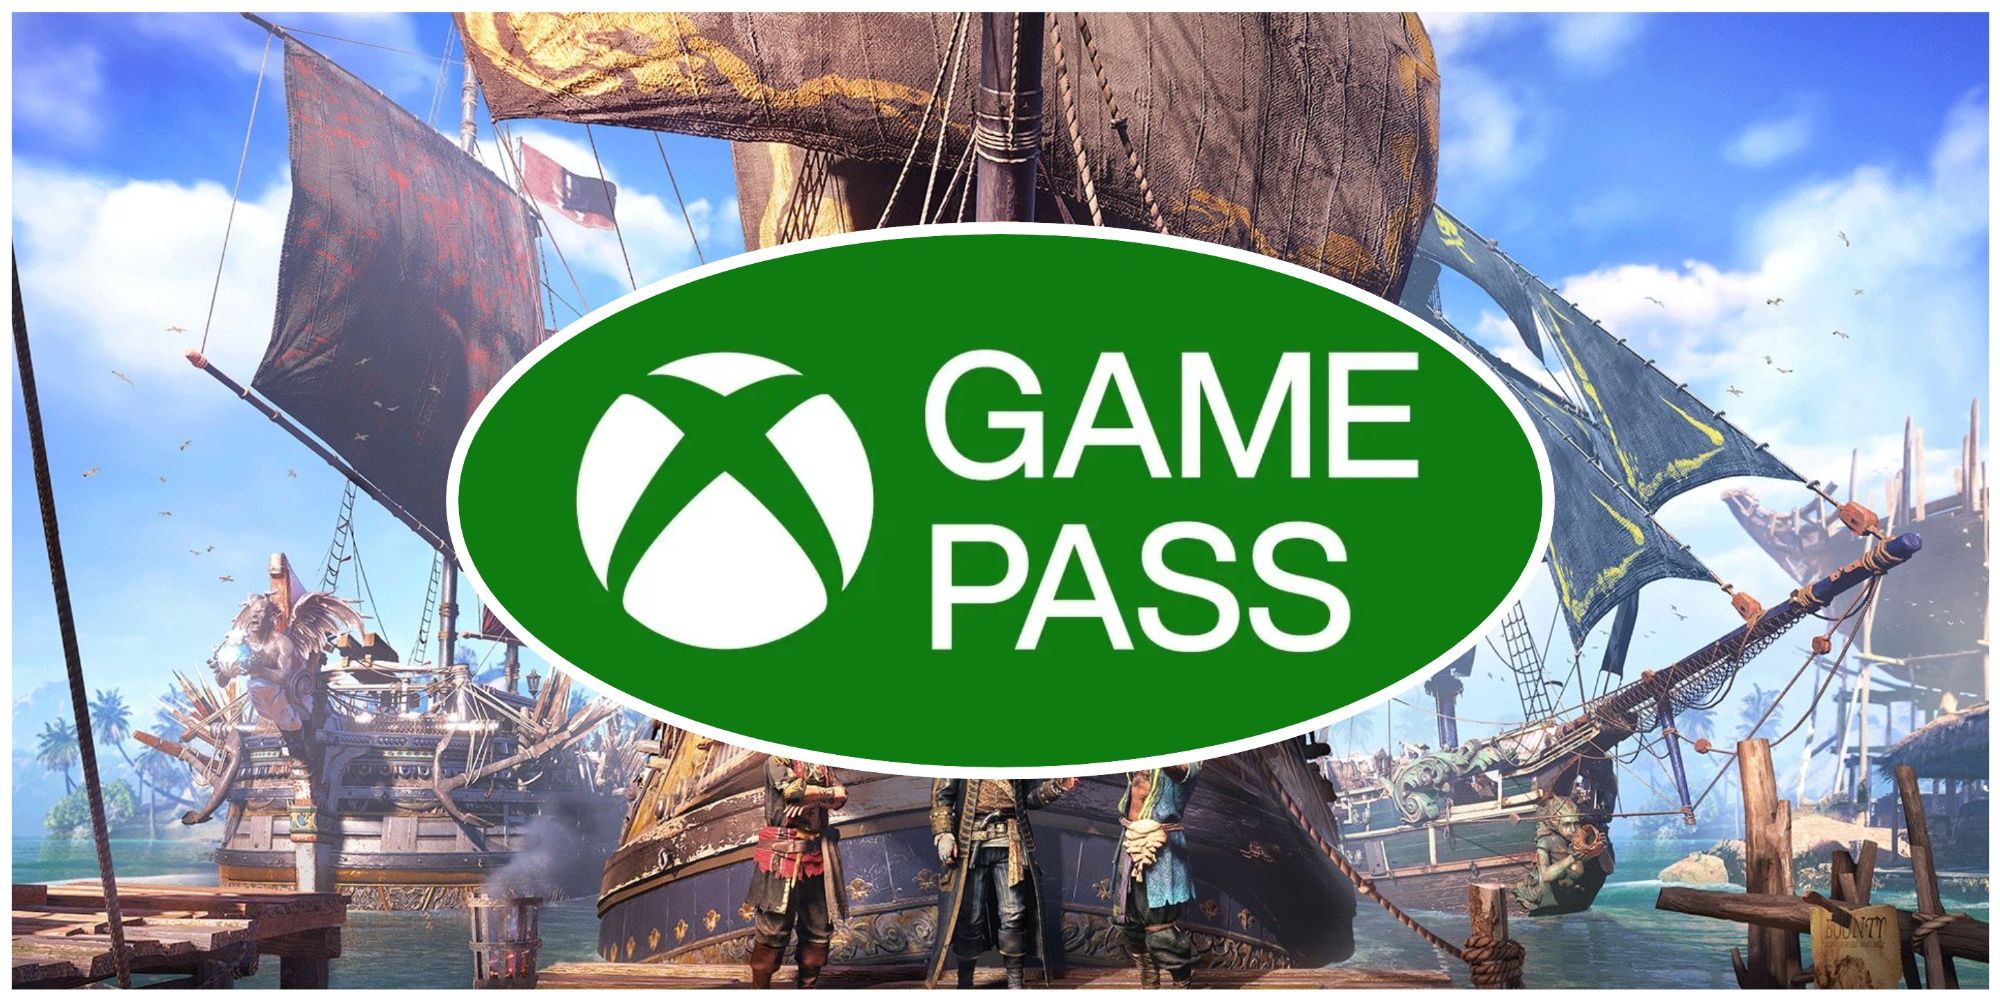 Skull and Bones Game Pass featured image